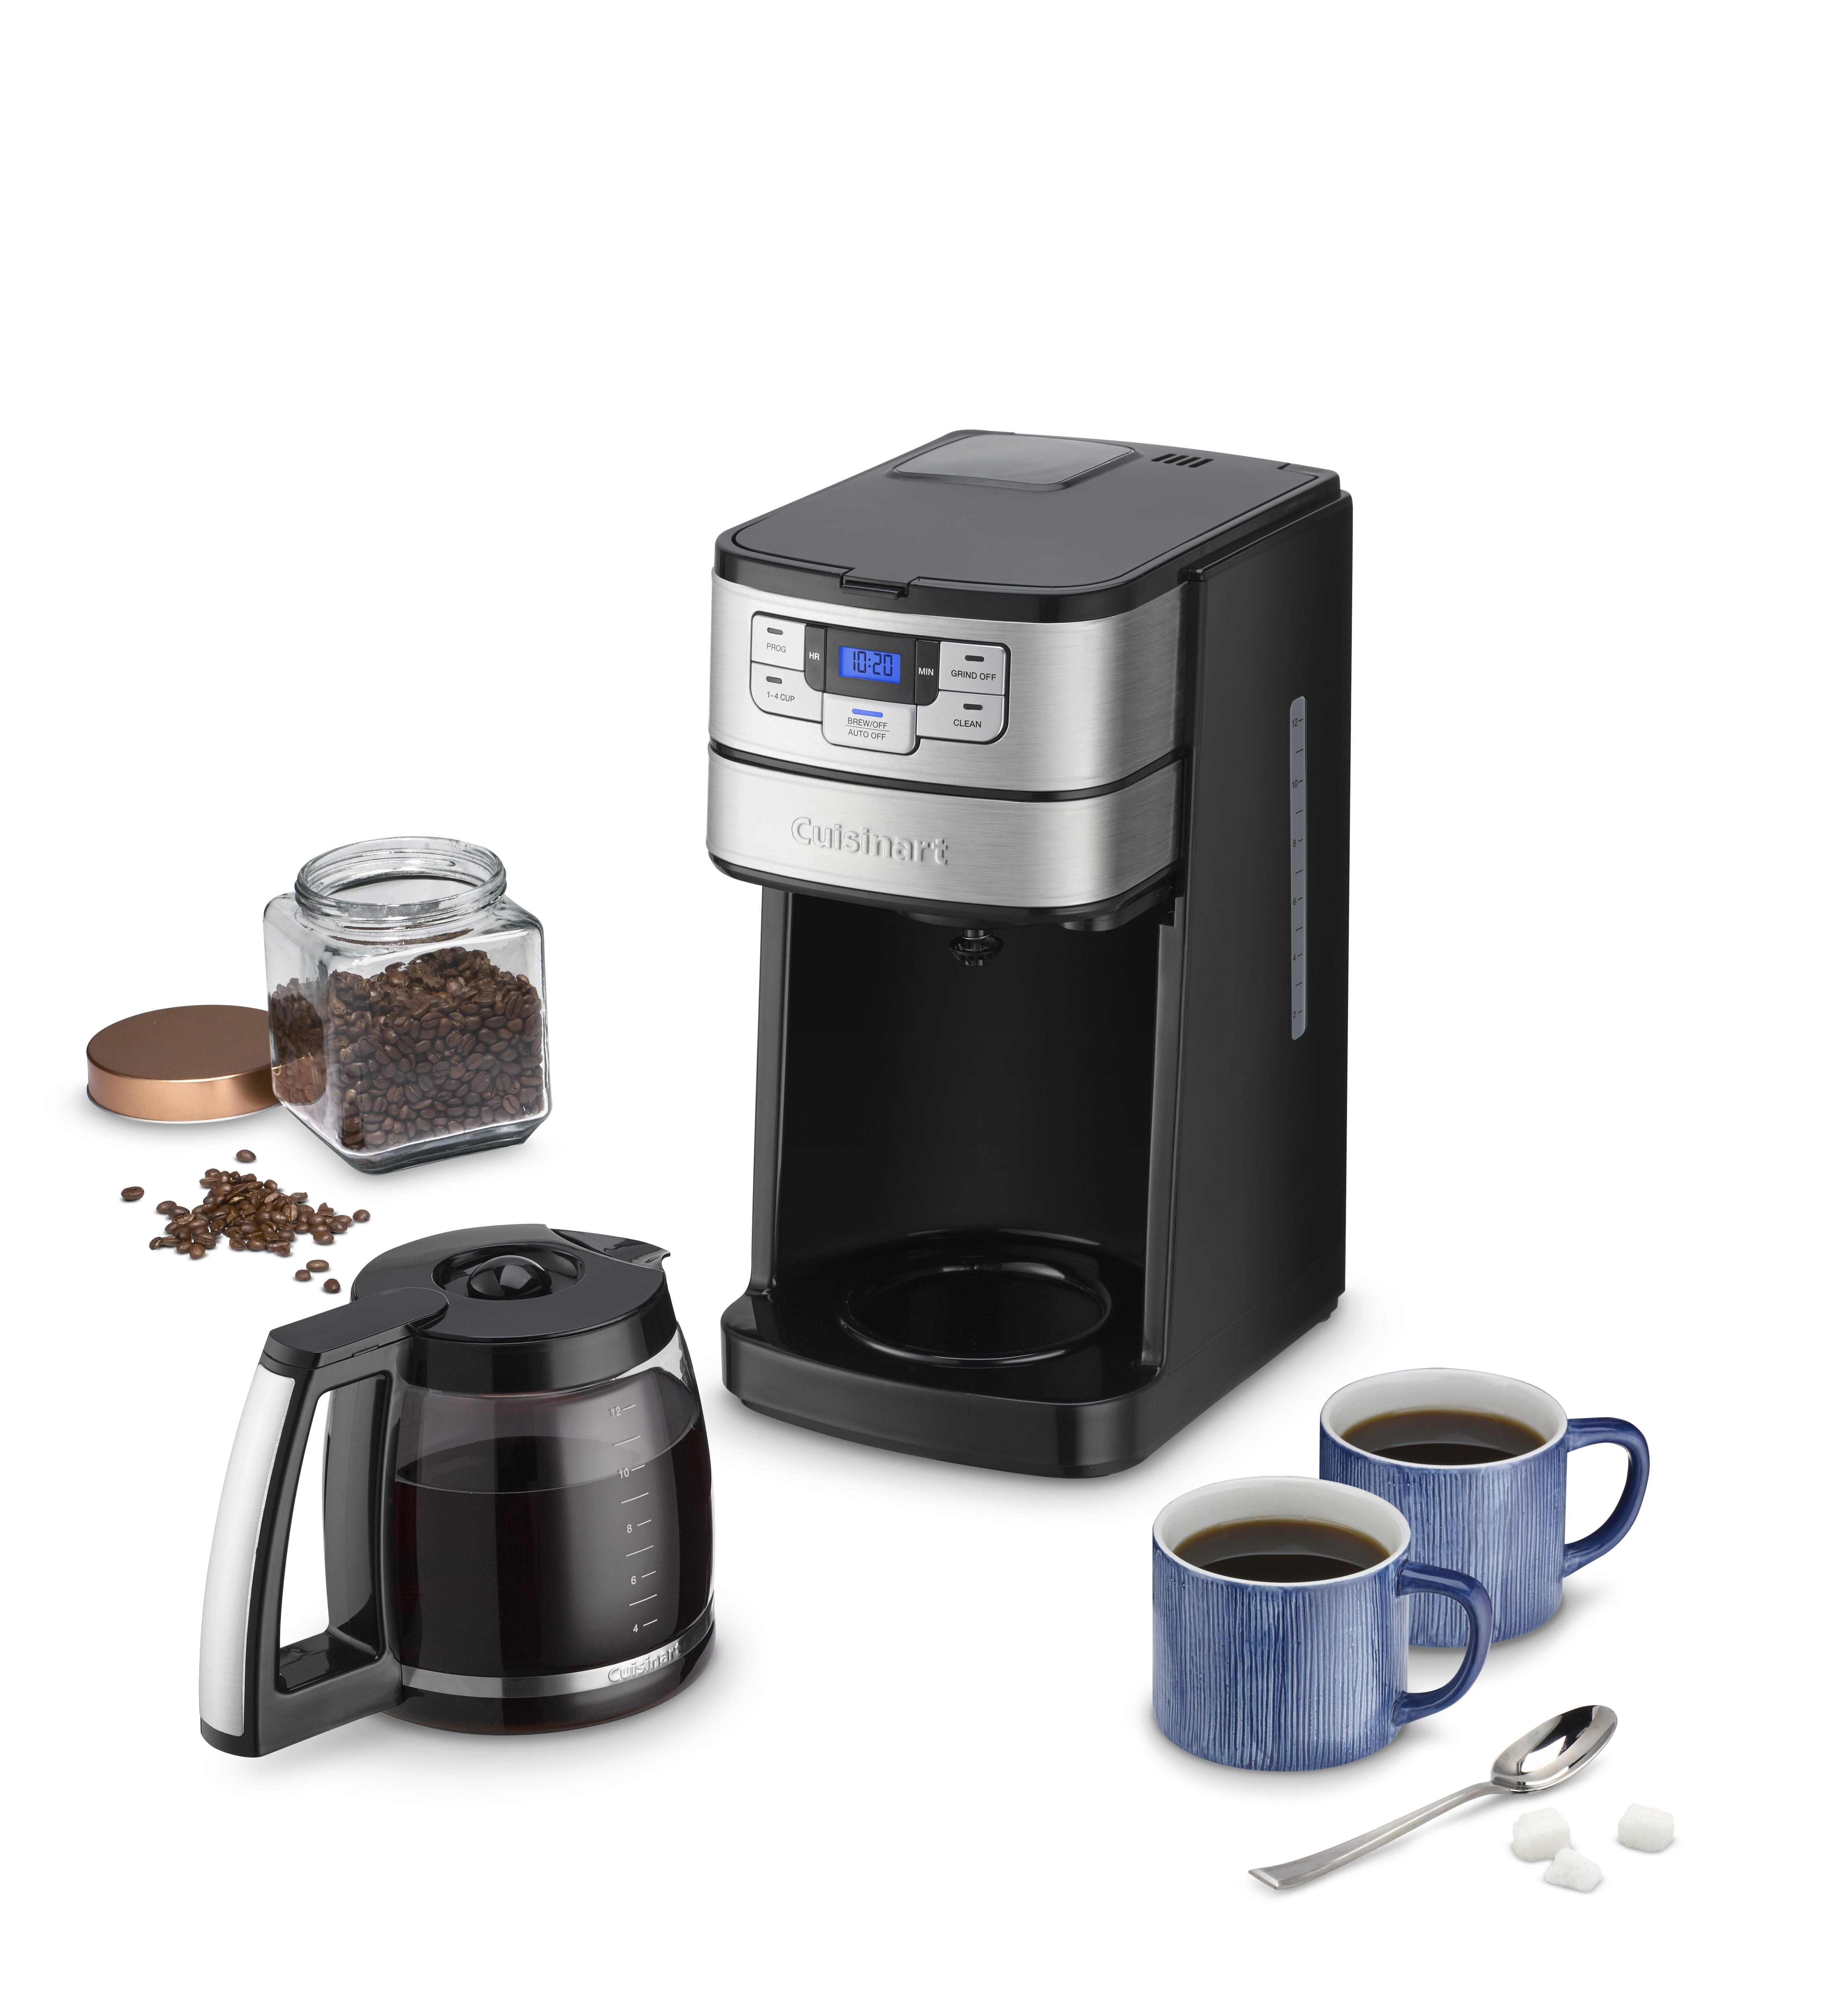 Cuisinart Grind ＆ Brew 12-Cup Automatic Coffee Maker Model#DGB-700BC by  Cuisinartテつョ Grind ＆ BrewTM [並行輸入品]＿並行輸入 通販